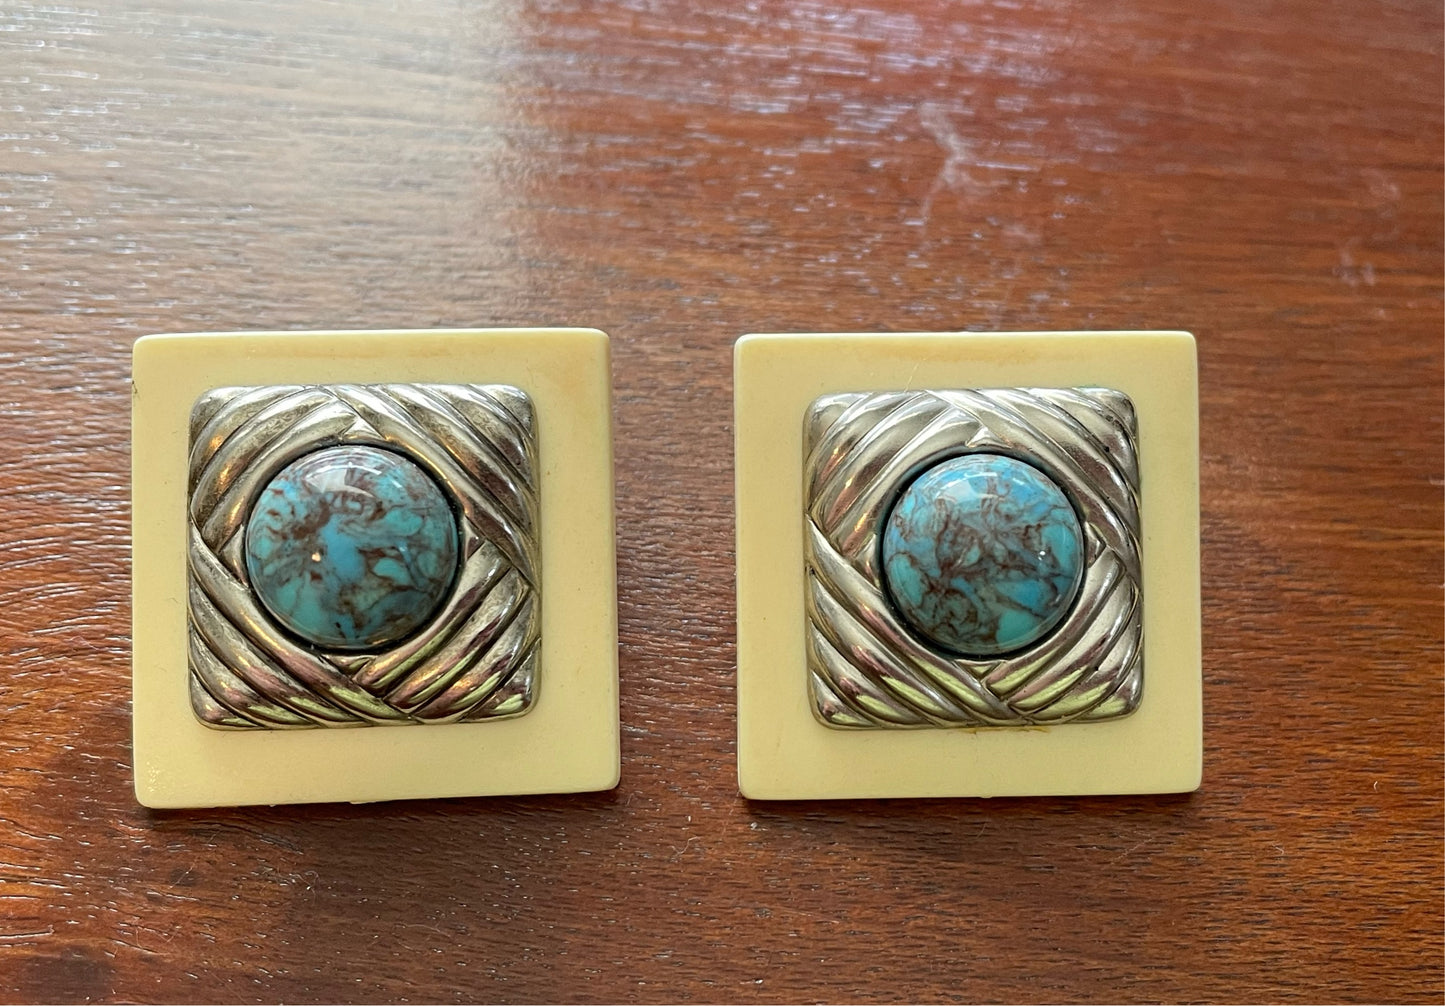 Vintage 80's Square Pierced Earrings Faux Turquoise Silver Tone